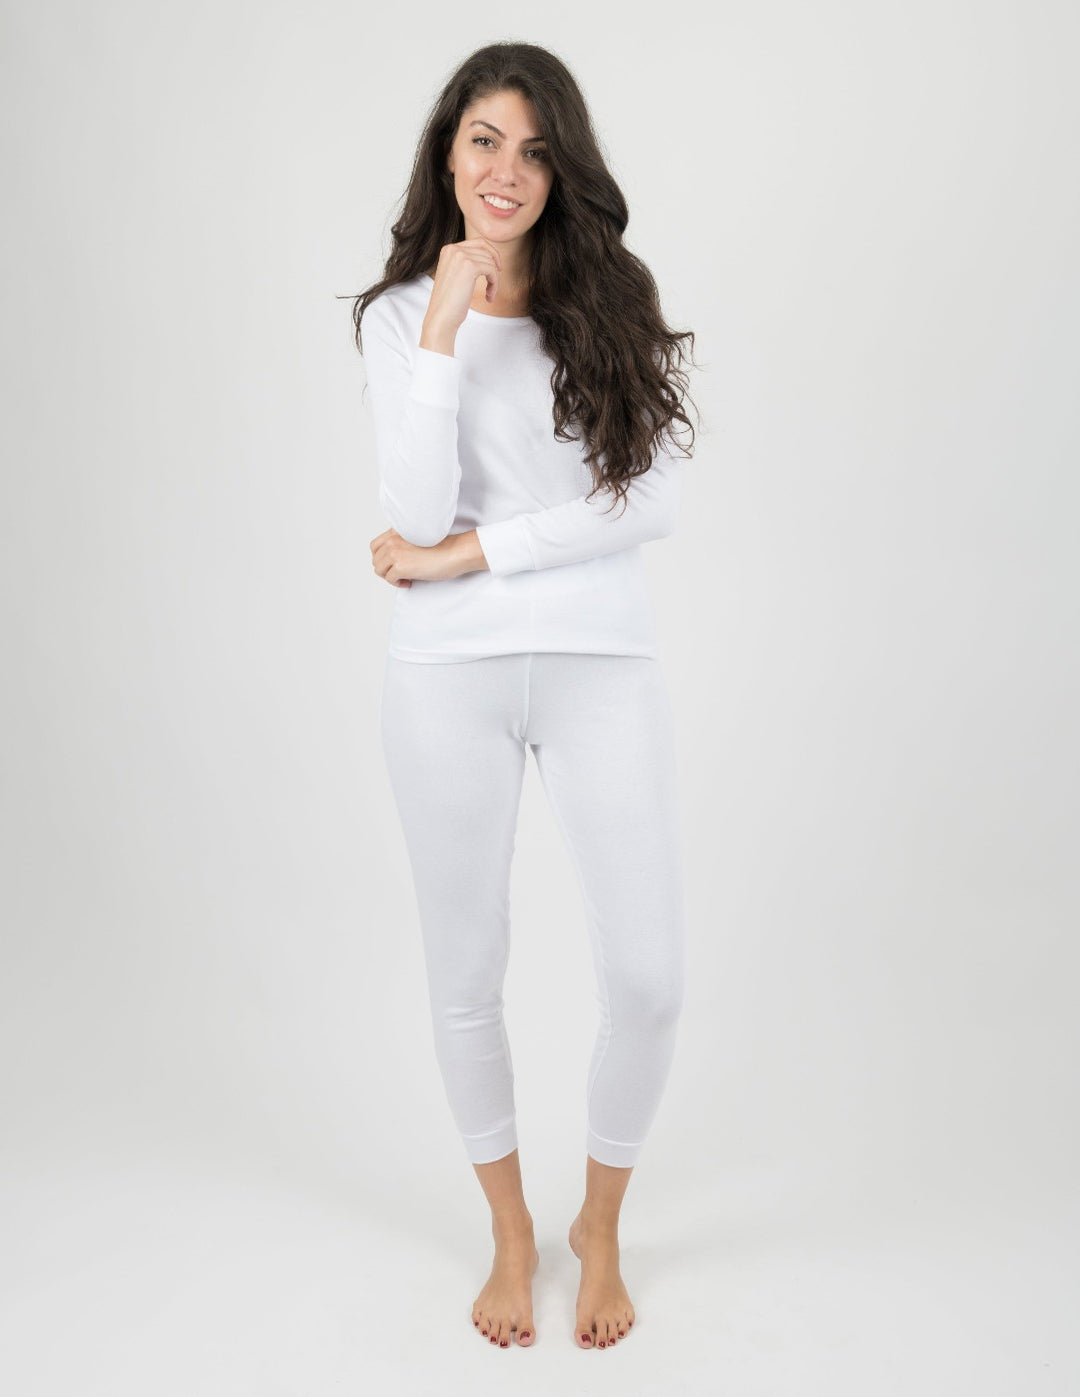 white solid color women's pajamas